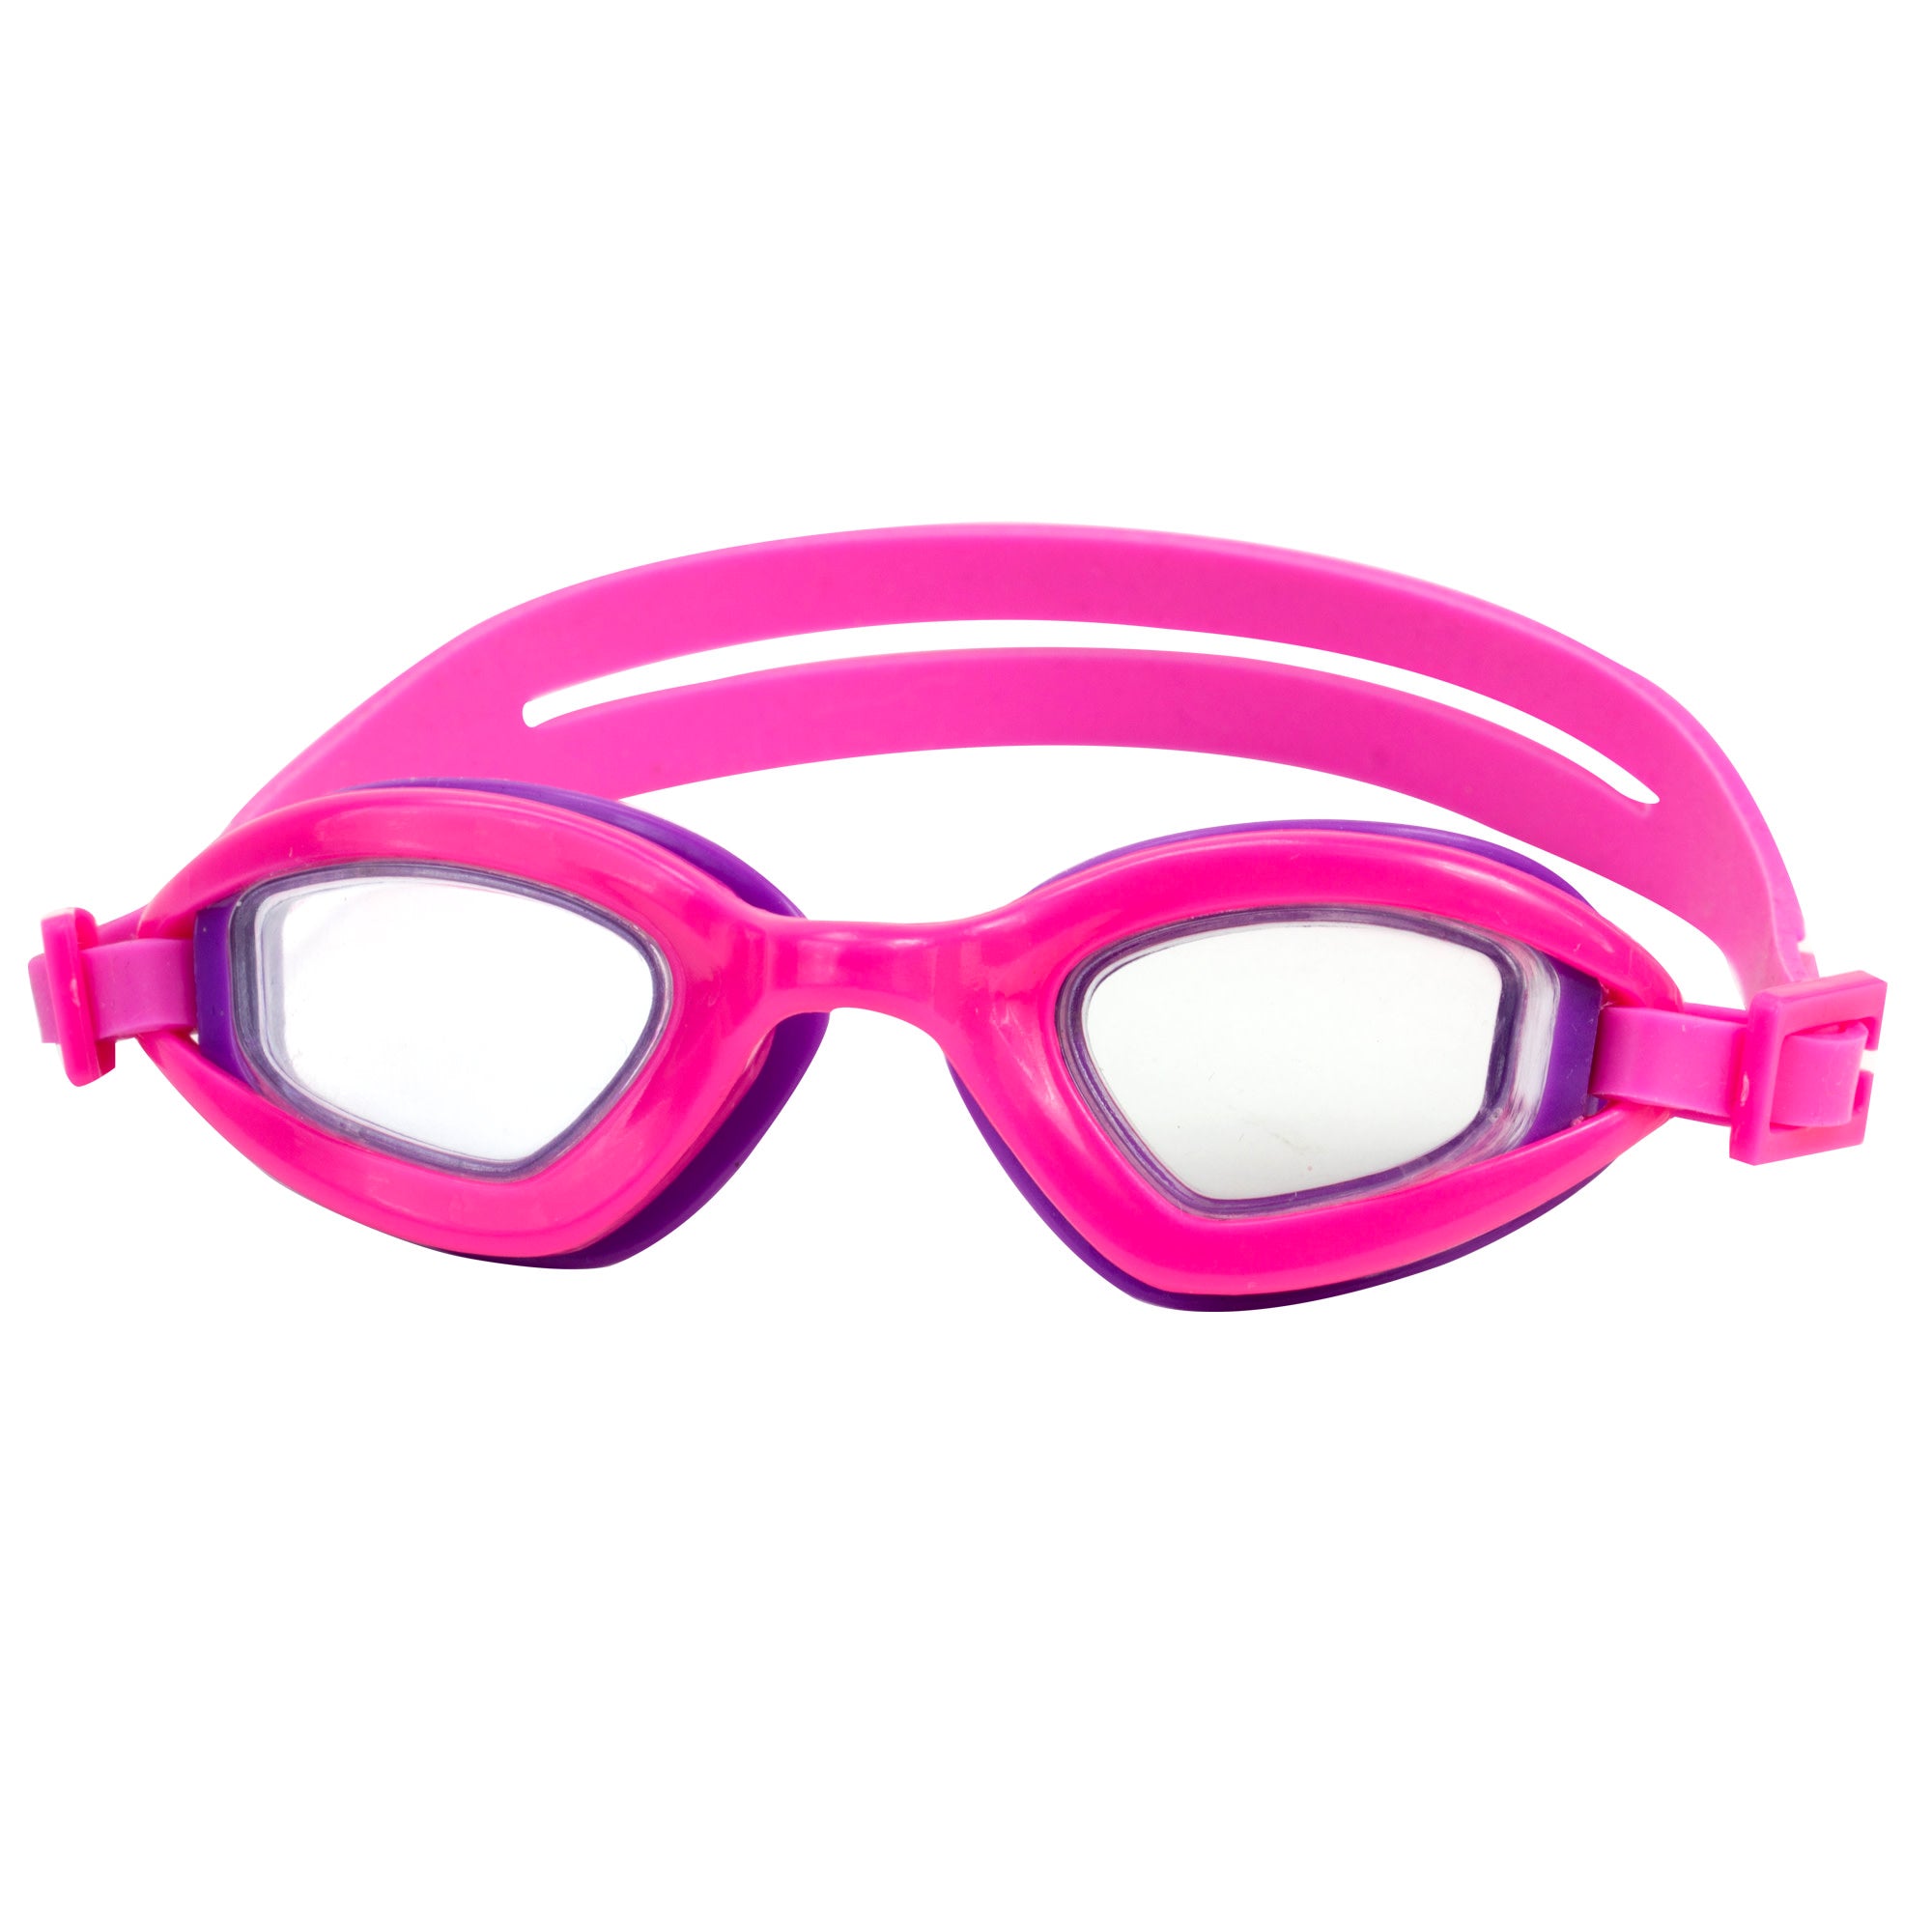 Sophia’s Two-Tone Mix & Match Realistic Seasonal Summer Swim Goggles Accessory for Beach or Pool Day for 18” Dolls, Hot Pink